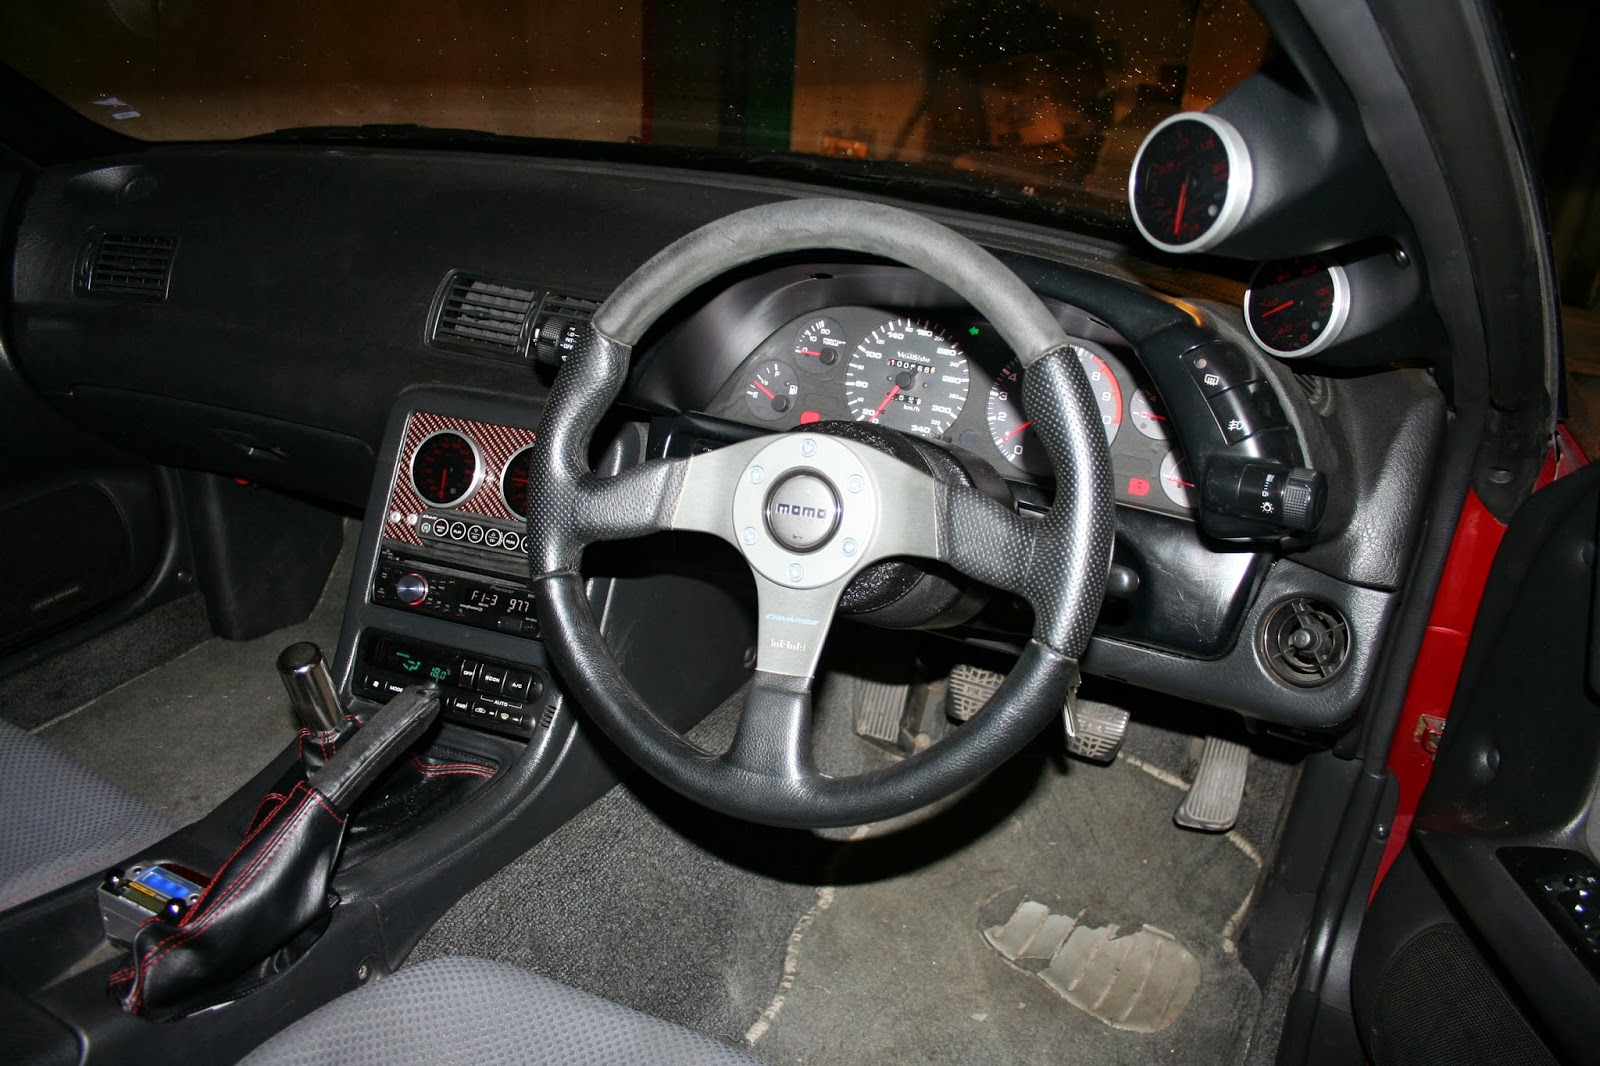 Custom Interior Instrument Cluster And Dash Console Gauges Racing Seats And Steering Wheel And Electronics Controllers